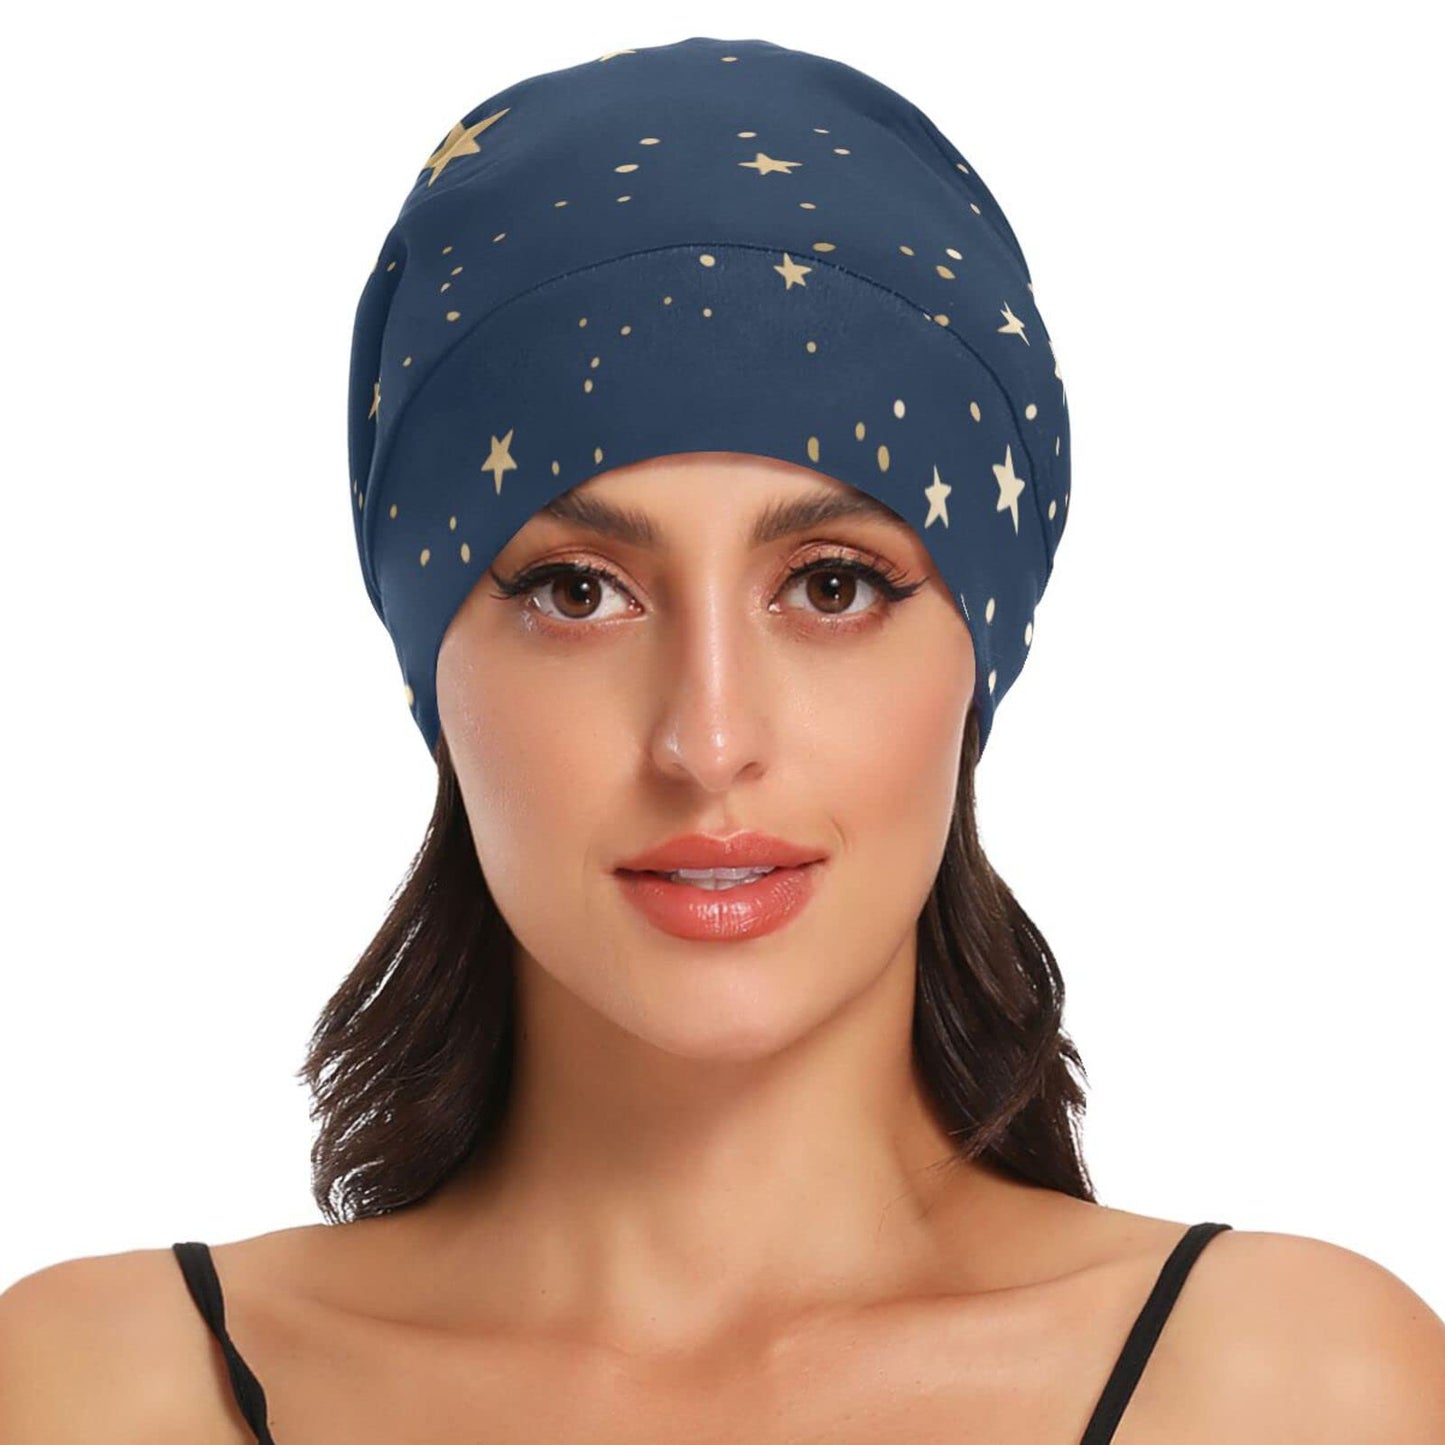 ElliTarr Satin Bonnet Lined Sleep Cap Hair Wrap Cover Slouchy Beanie for Curly Hair Protection for Gifts for Men Women Dark Blue Stars